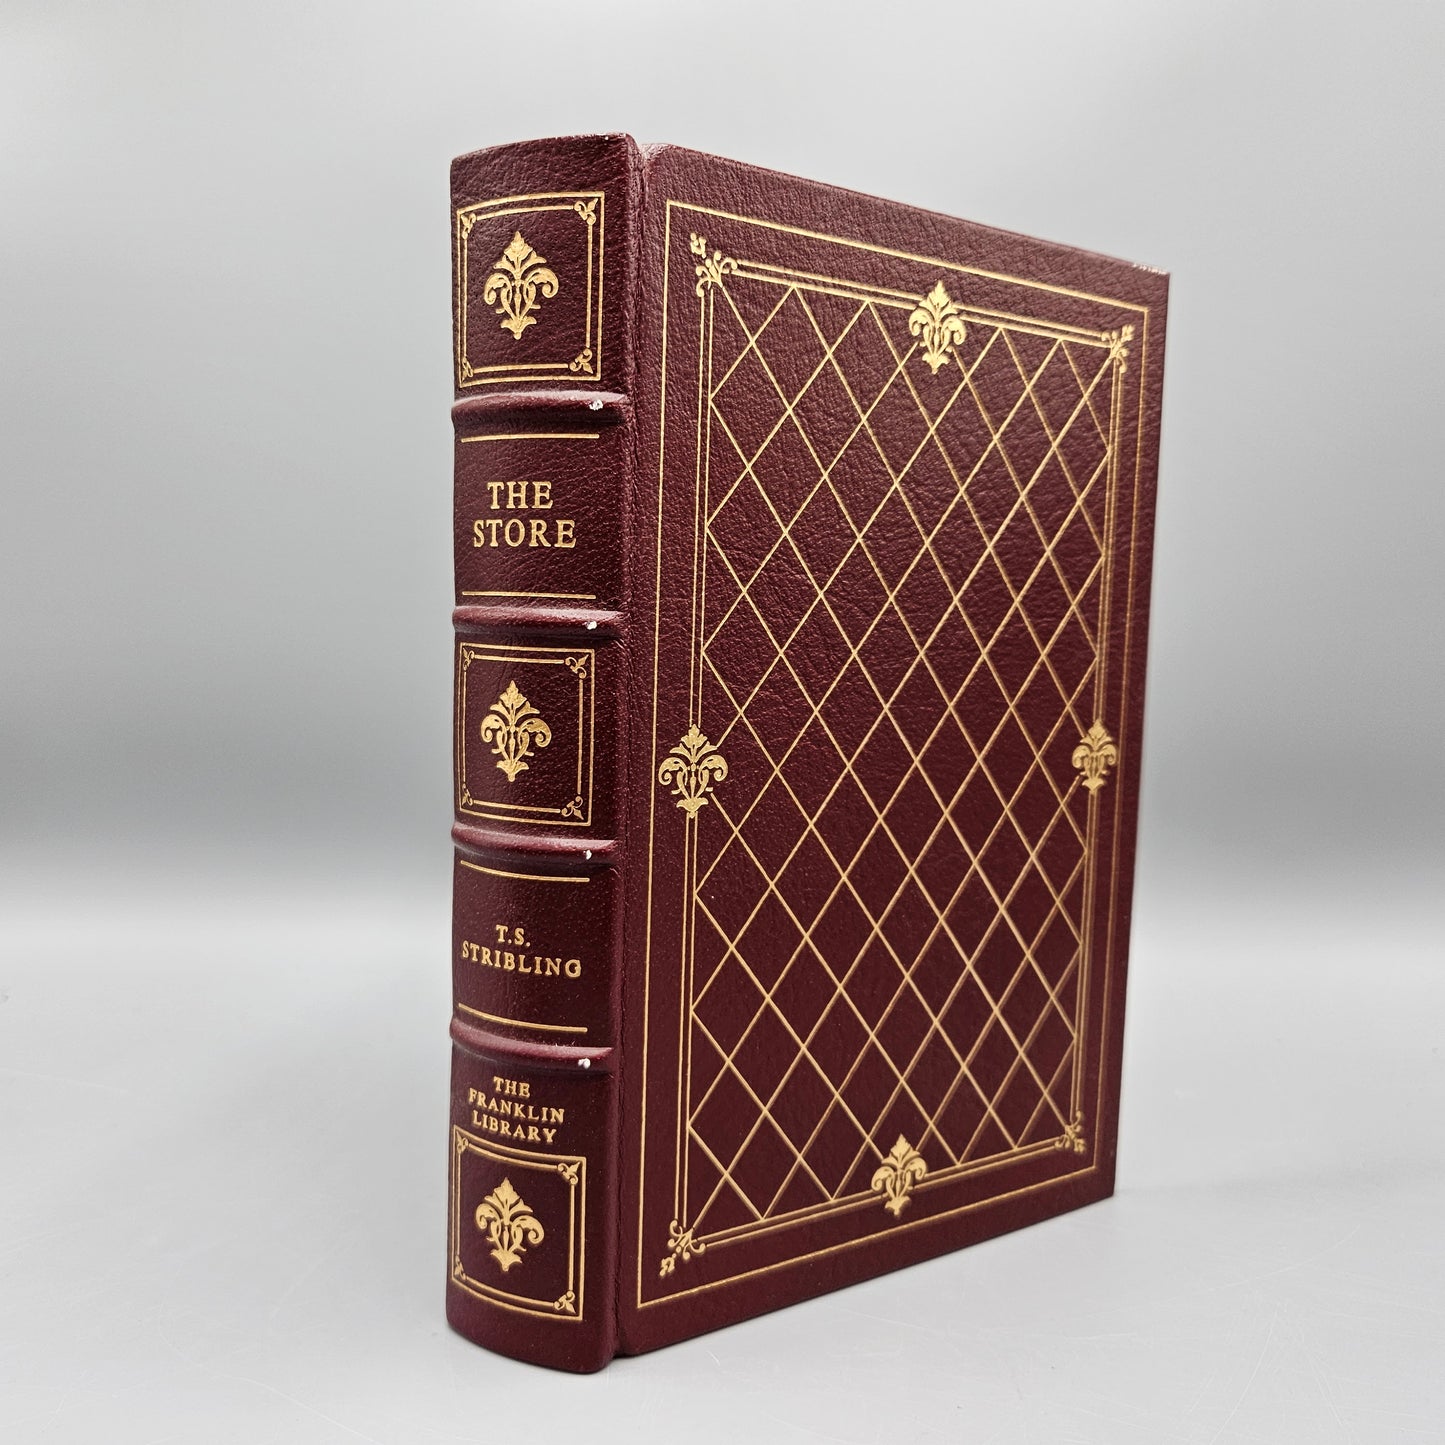 Leatherbound Book TS Stribling "The Store" Franklin Library